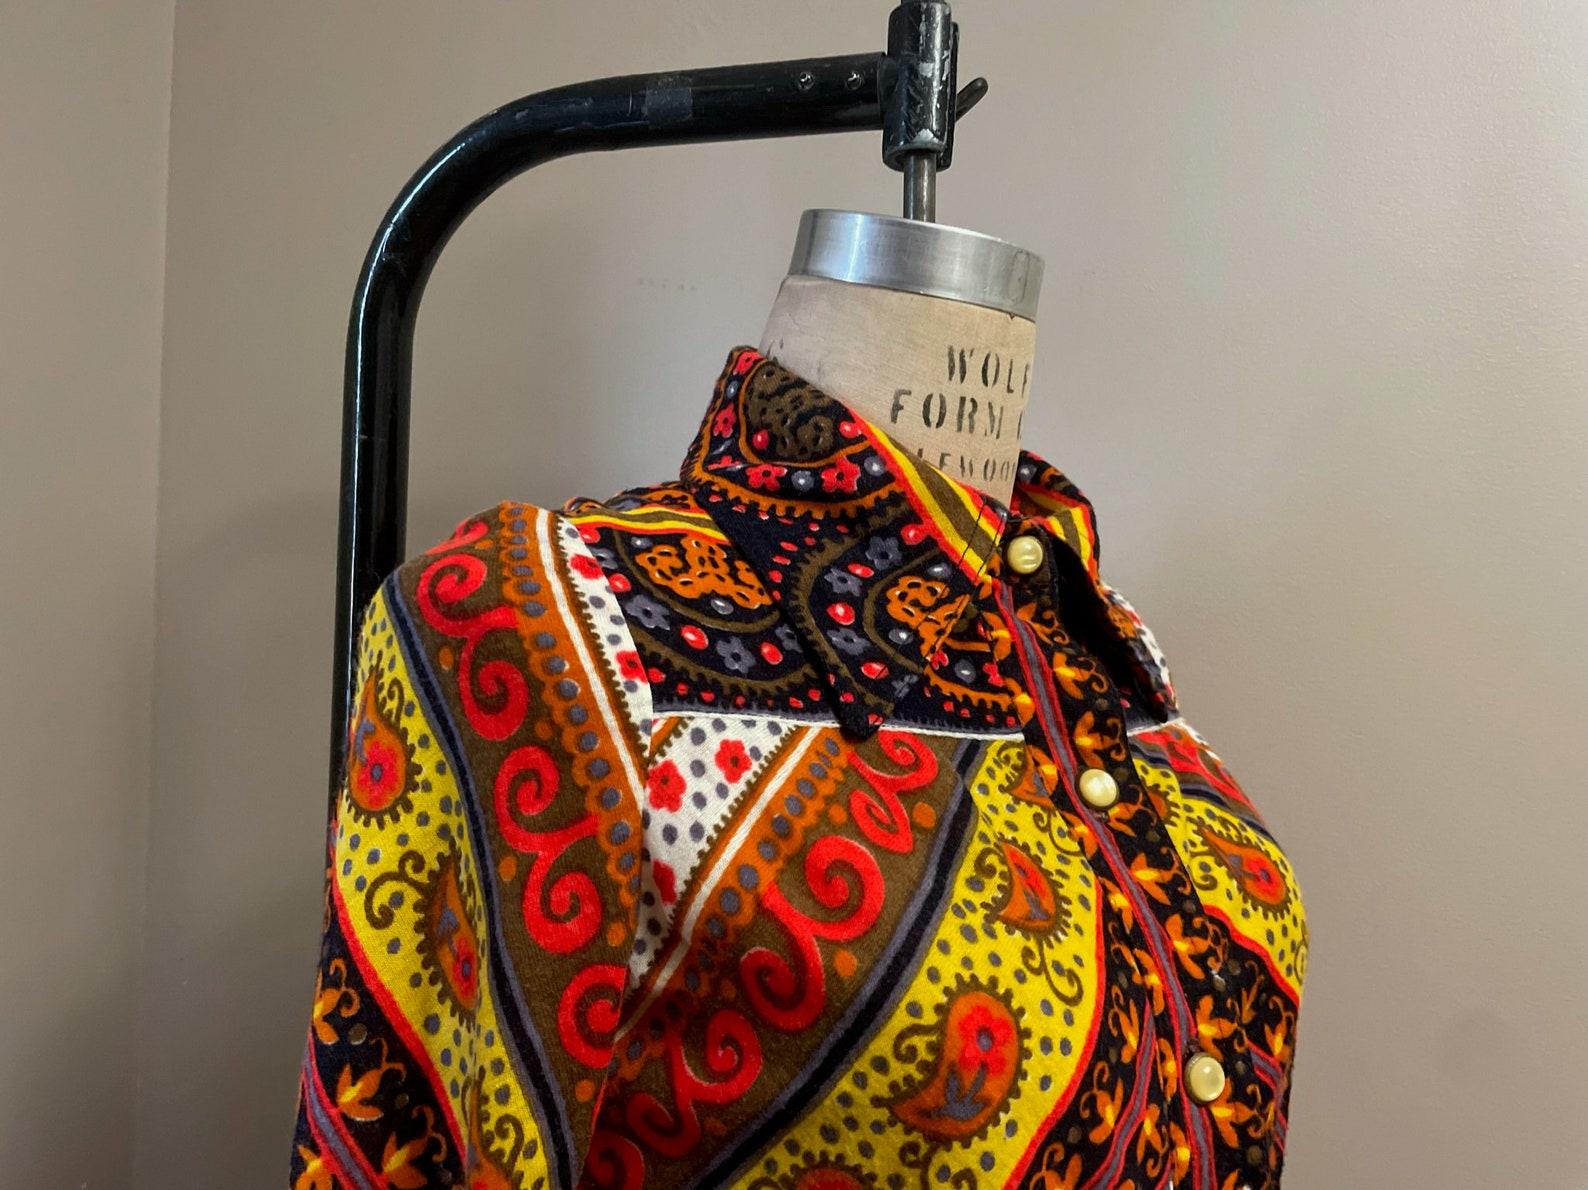 1970s Pat Sandler Psychedelic Paisley Print Shirt In Excellent Condition For Sale In Brooklyn, NY